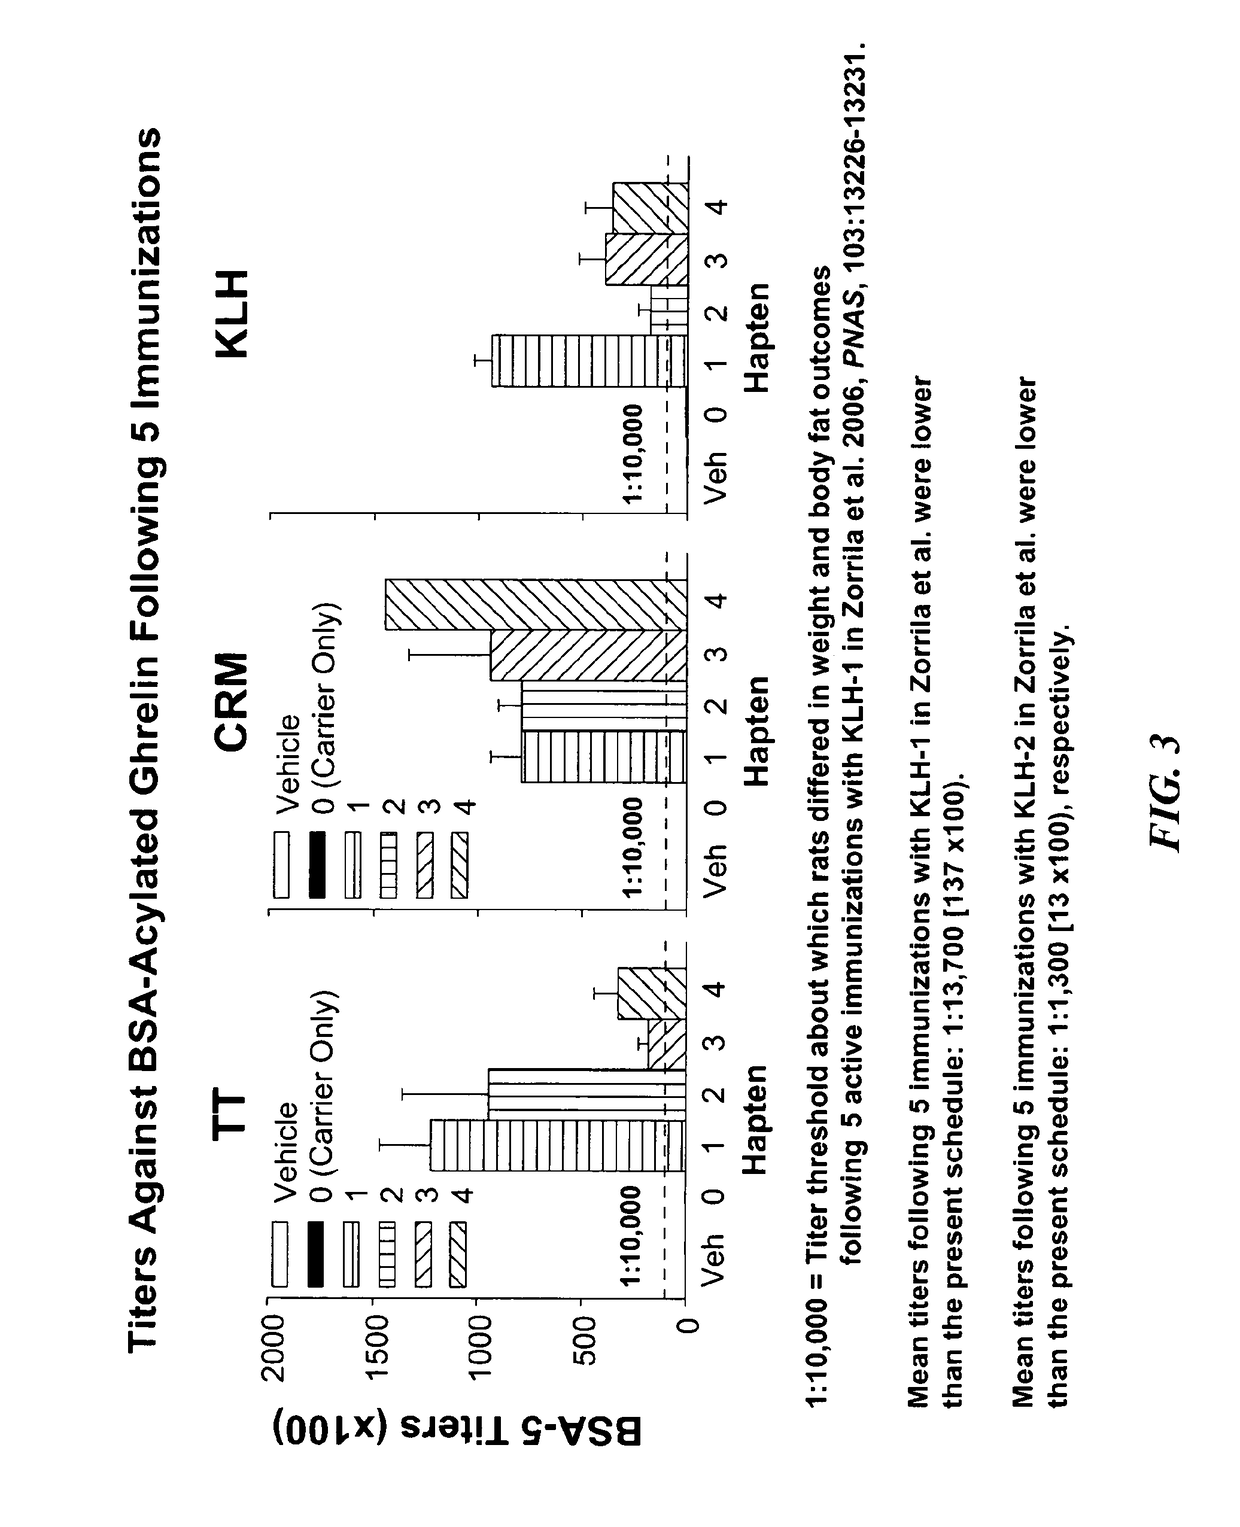 Ghrelin mimetic polypeptide hapten immunoconjugates having improved solubility and immunogenicity and methods of use thereof